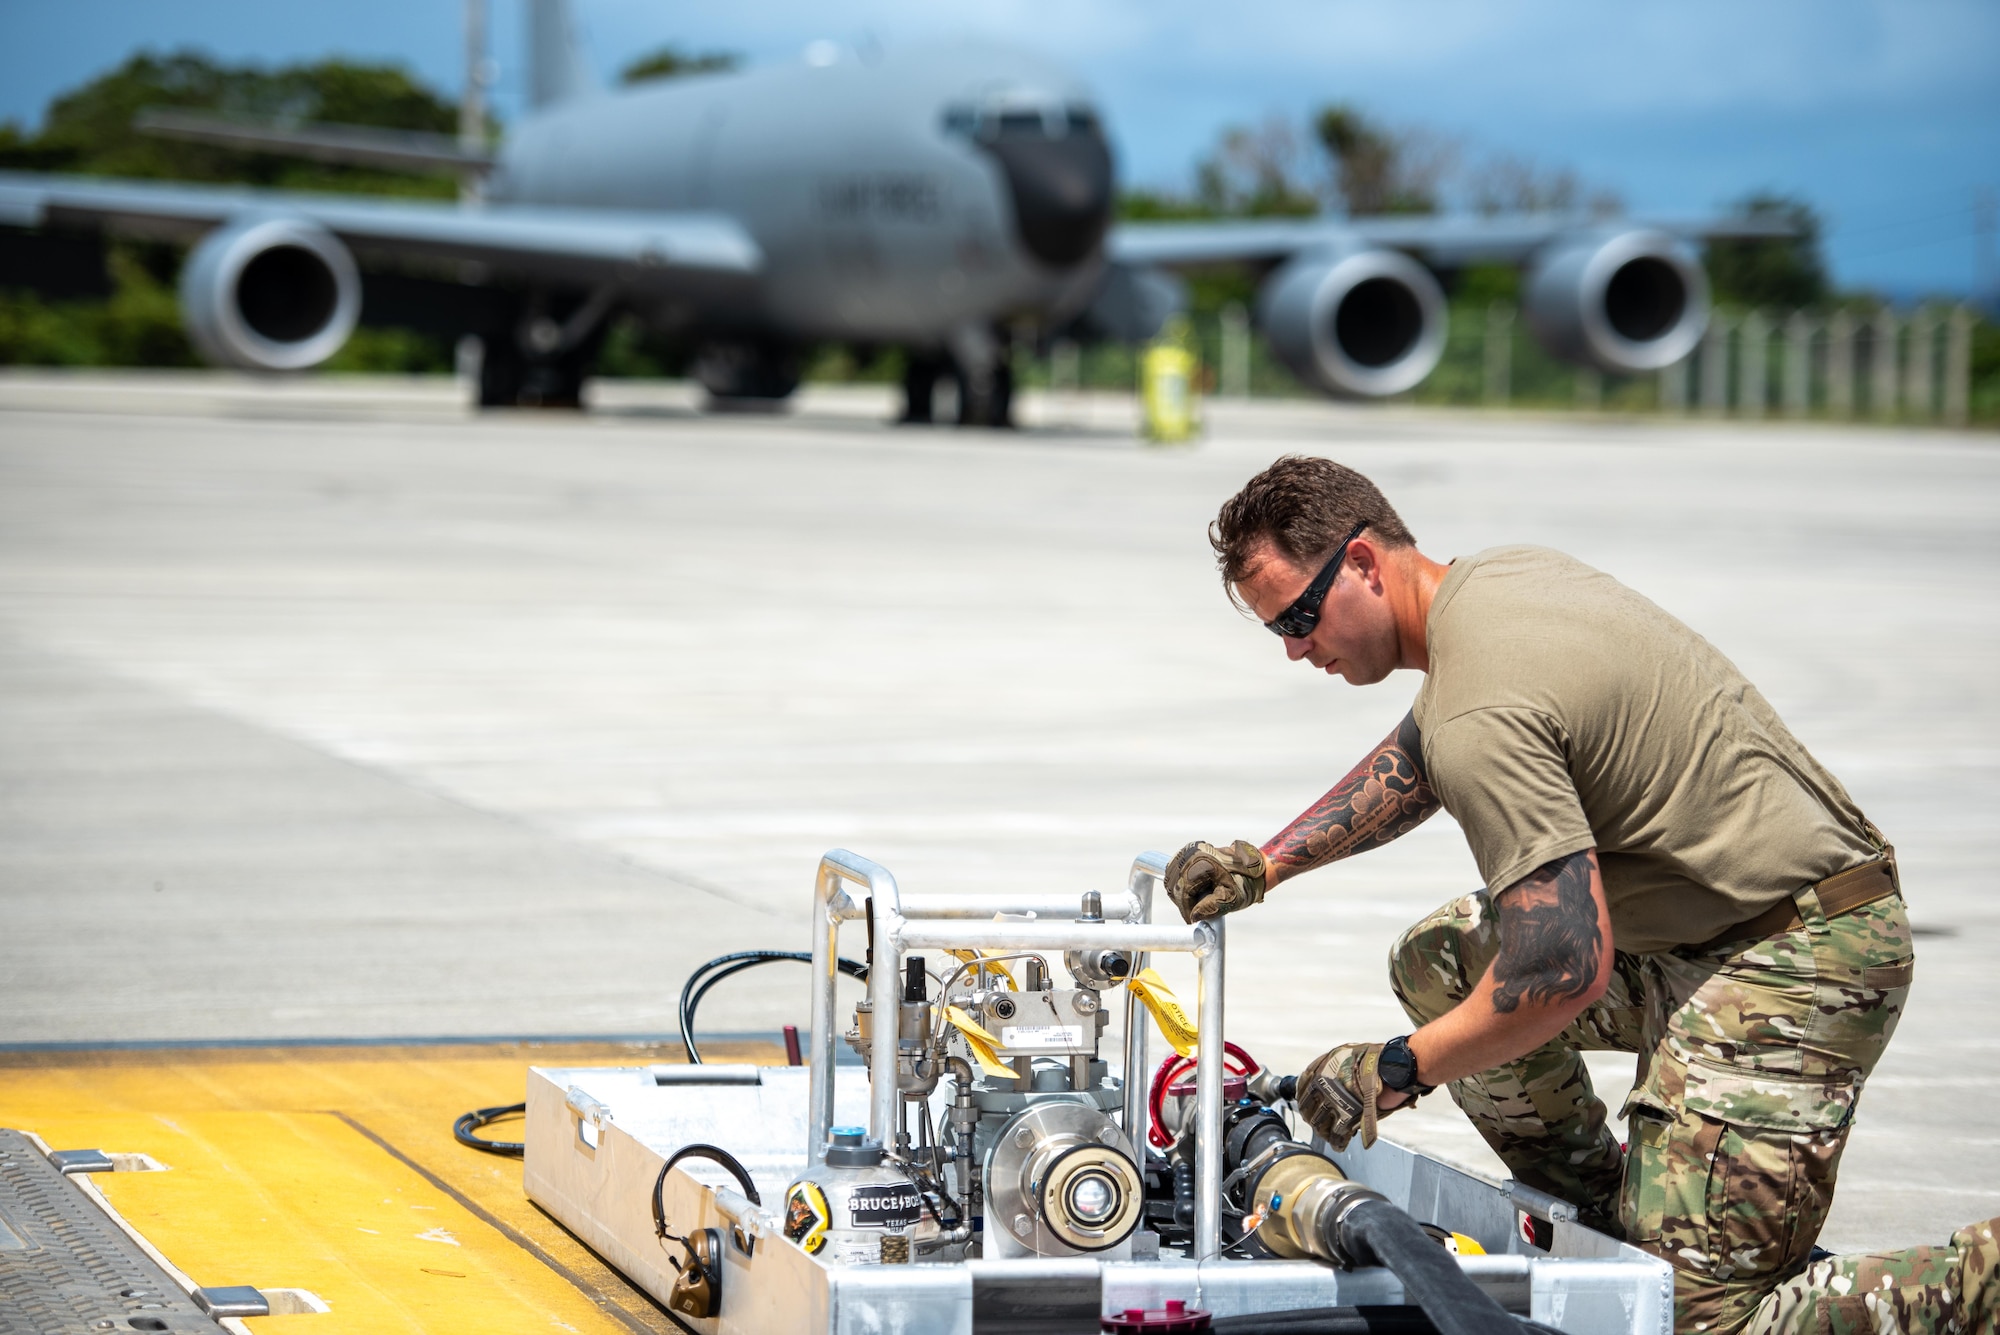 Airmen preparing a refueling kit prior to refueling an aircraft